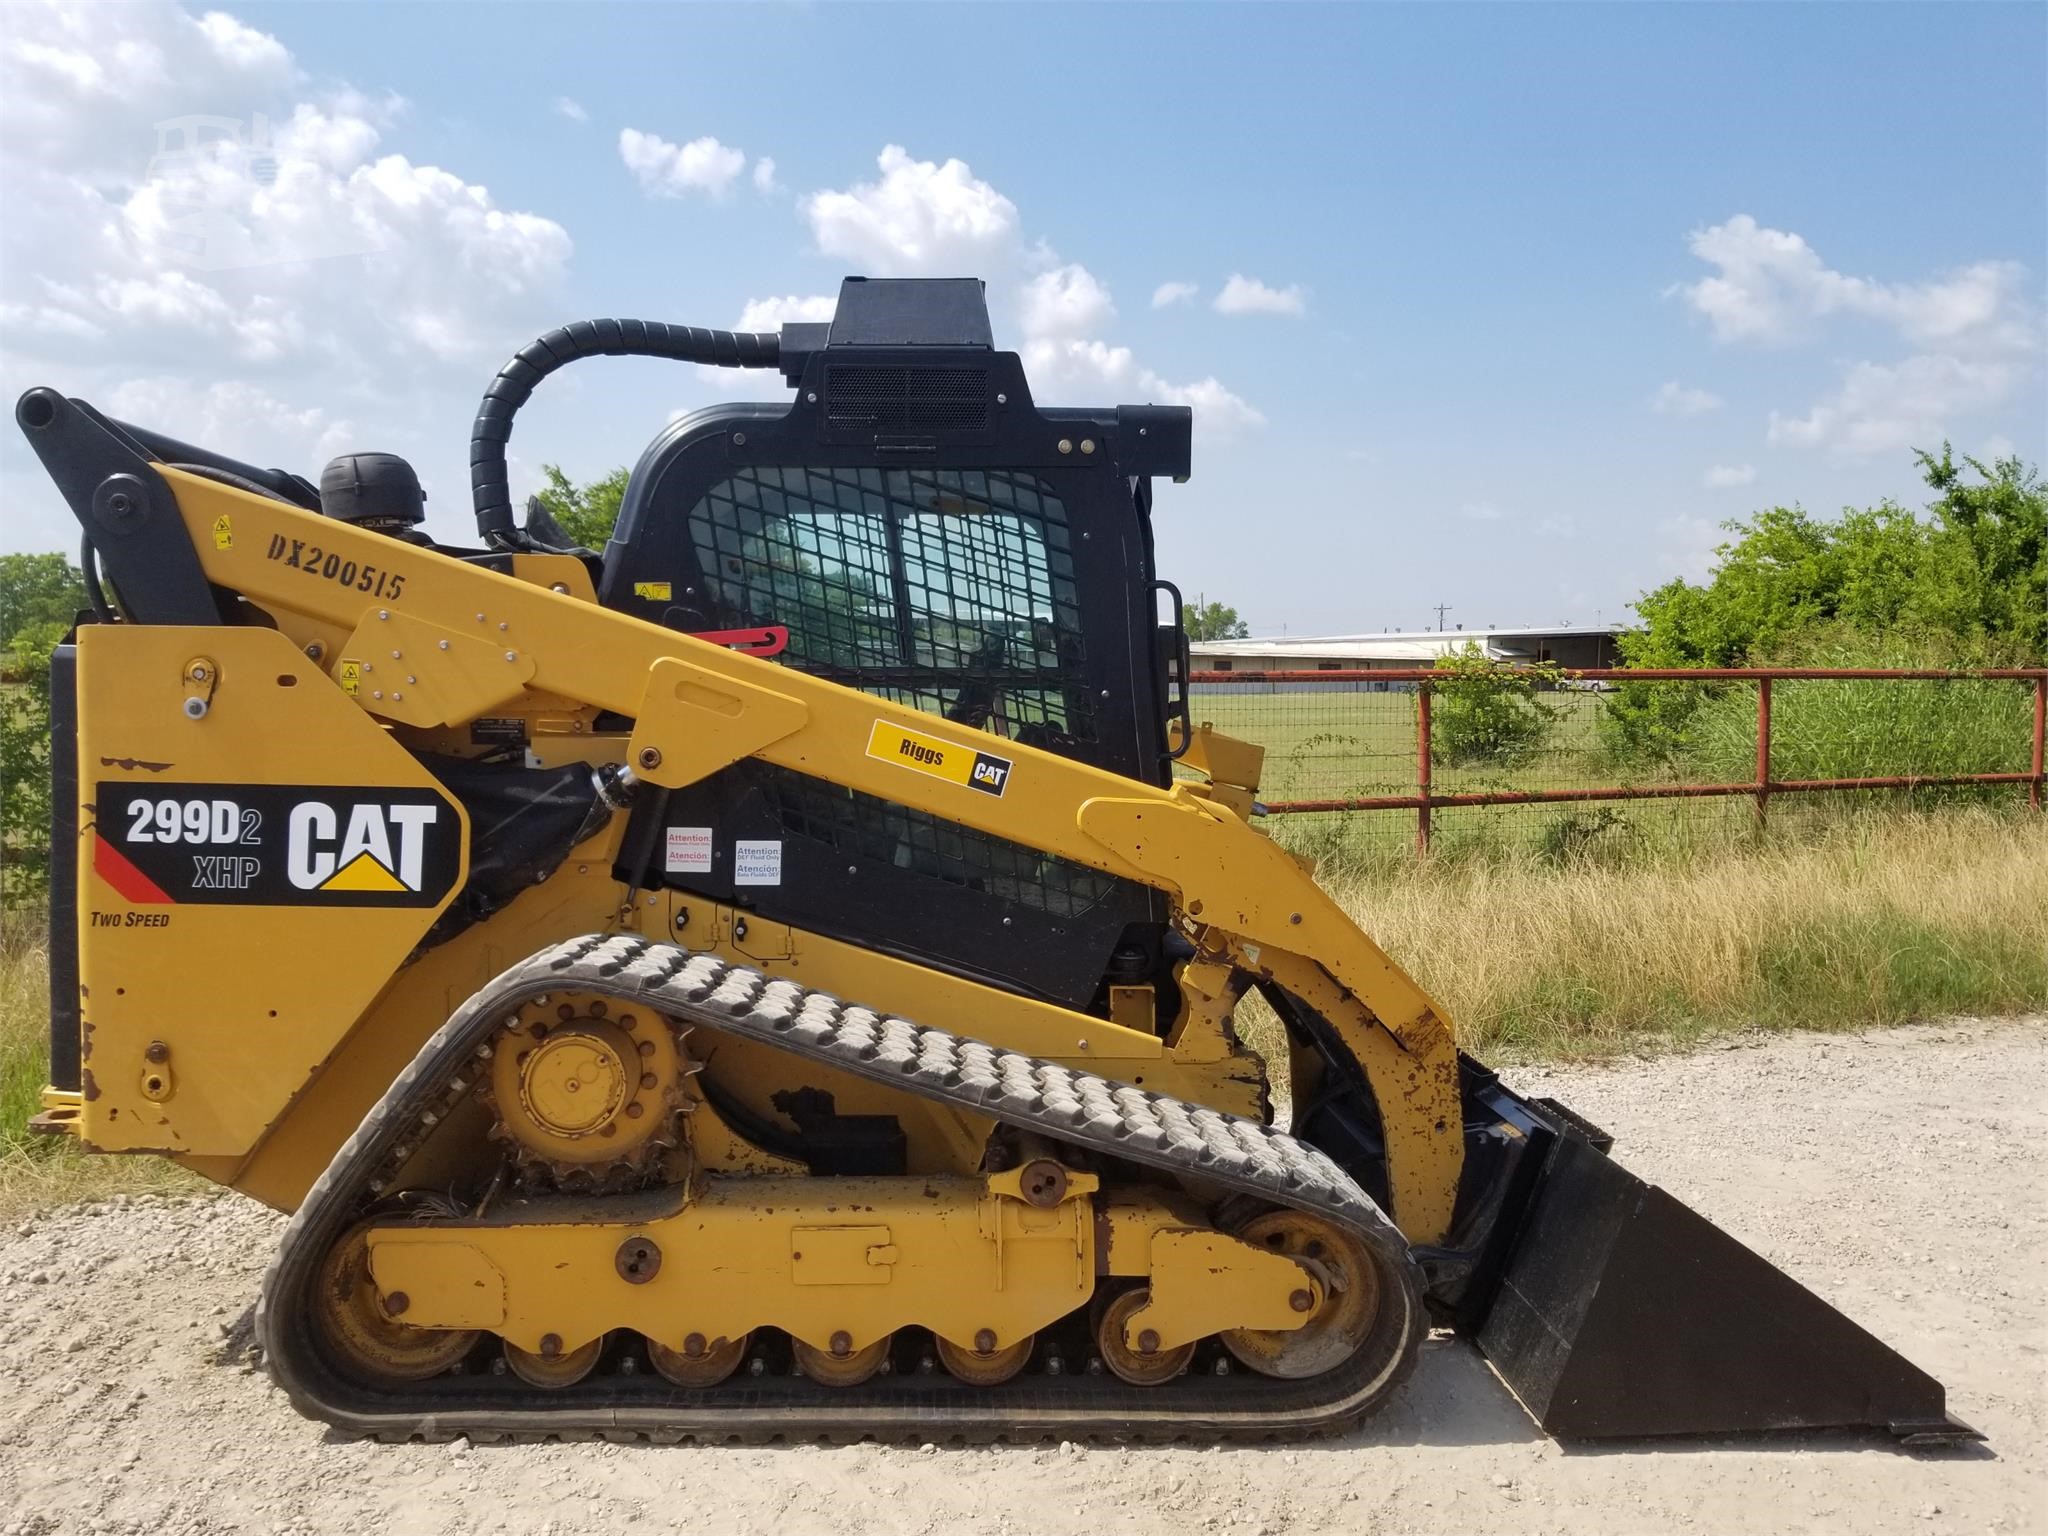 CAT 299D2 XHP For Sale In Kemp, Texas | MachineryTrader.com